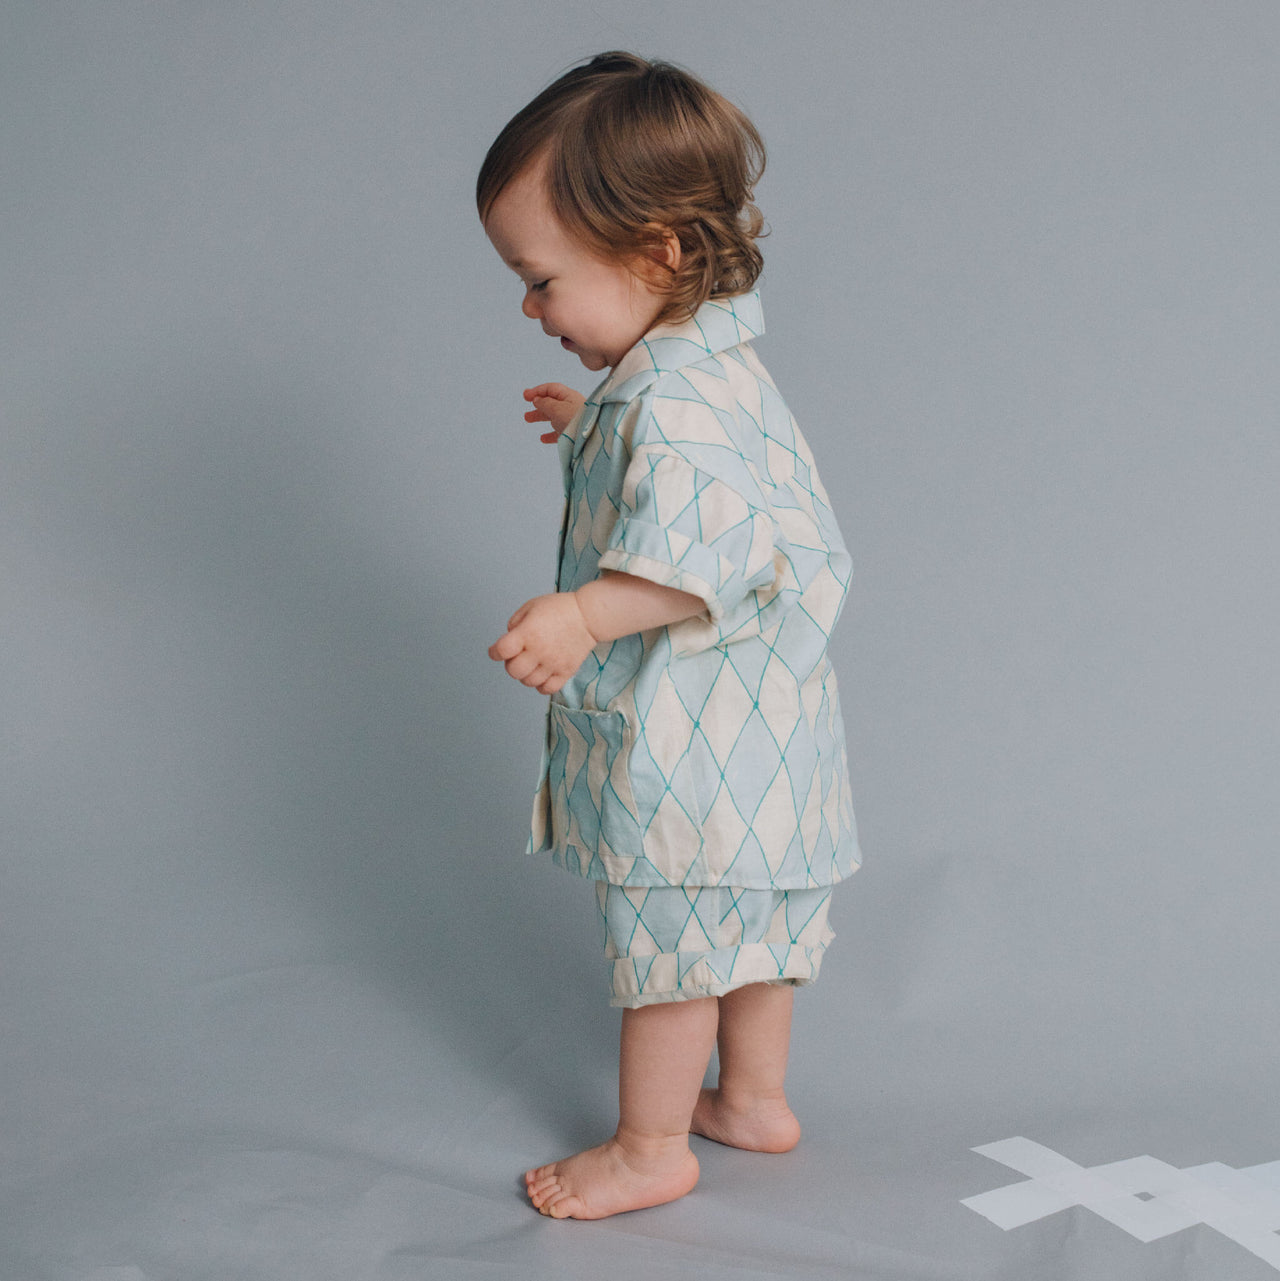 Foal Pelerinage collection harlequin print linen shirt and shorts